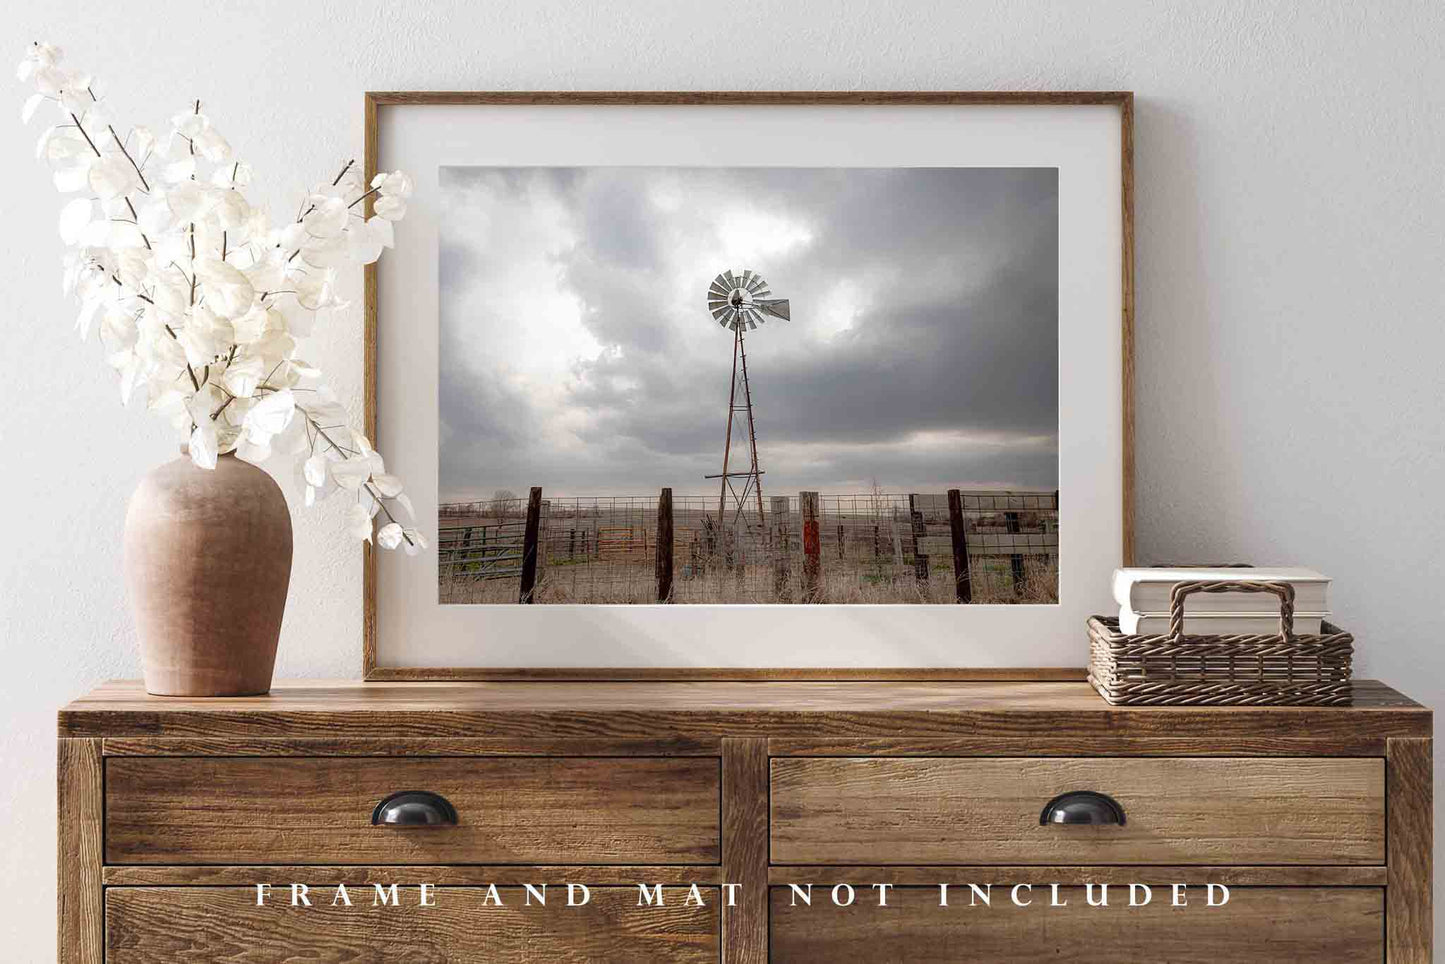 Farm Wall Art - Picture of Windmill Against Silver Sky in Iowa - Country Farmhouse Photography Photo Print Artwork Decor